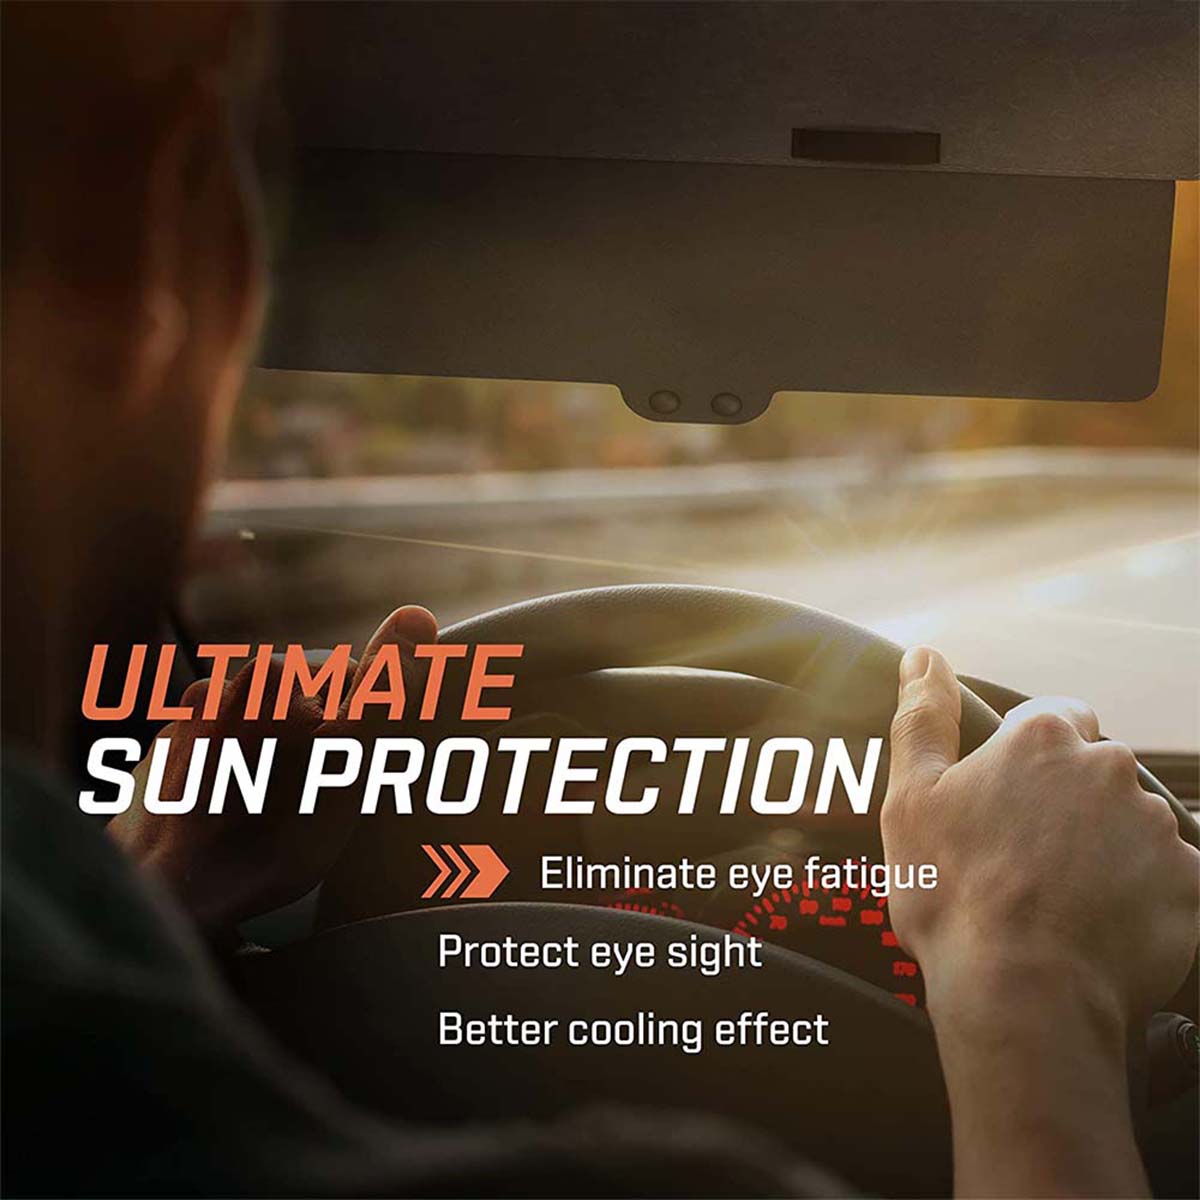 Delicate Leather Polarized Sun Visor Sunshade Extender for Car with Polycarbonate Lens, Custom For Your Cars, Anti-Glare Car Sun Visor Protects from Sun Glare, Snow Blindness, UV Rays, Universal for Cars, SUVs CA13999 - Delicate Leather